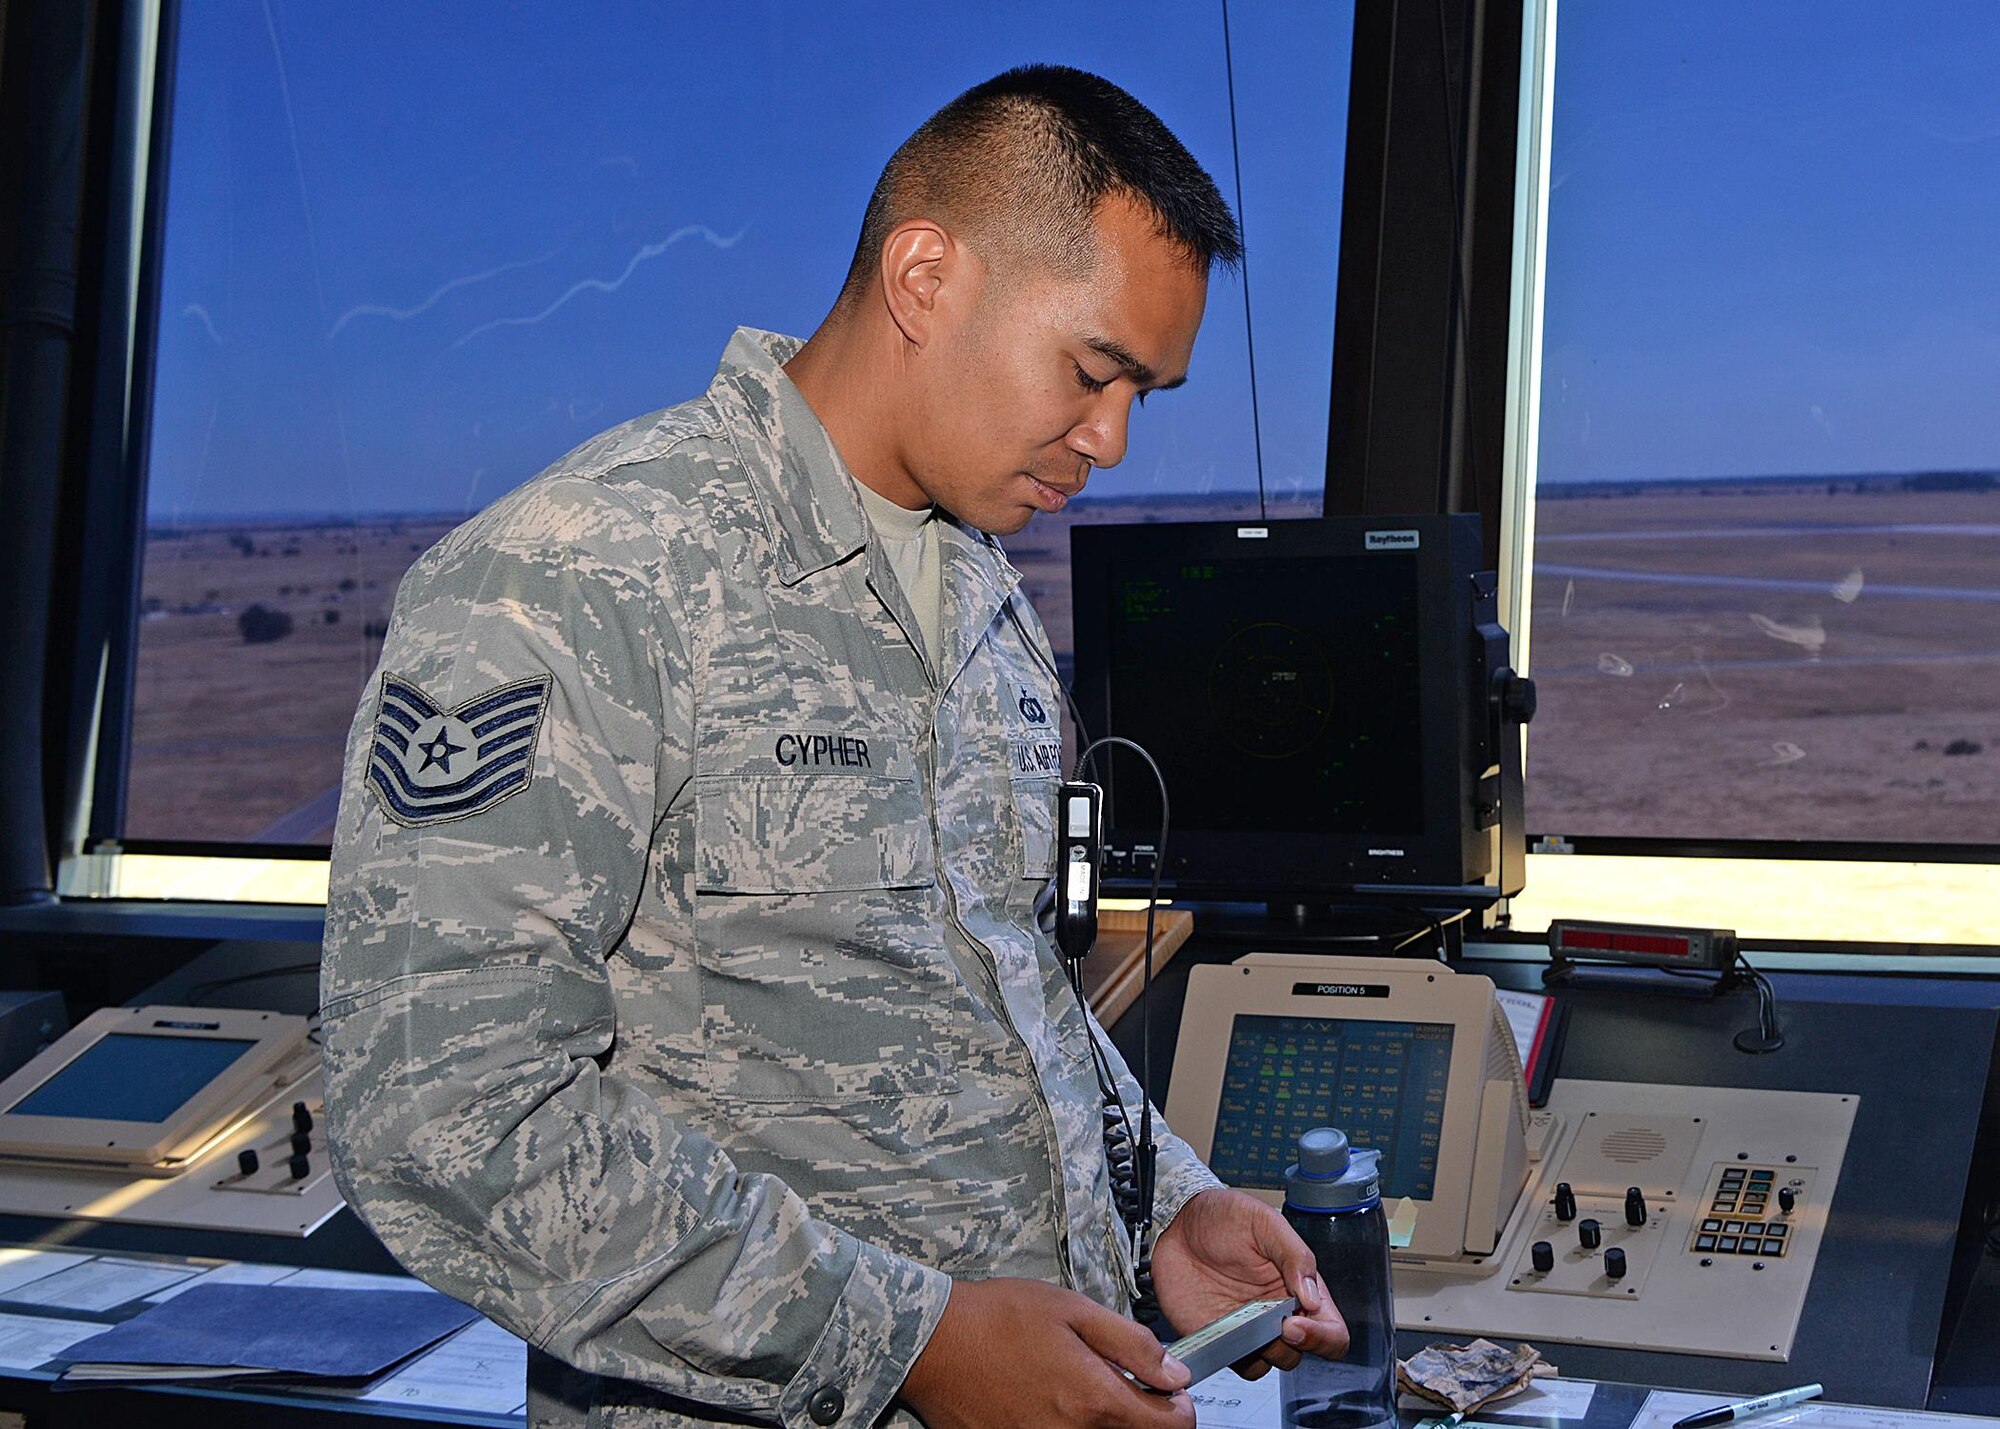 Tech. Sgt. Steven Cypher, 9th Operations Support Squadron NCO in charge of standards and evaluations, relays ground information to a pilot Aug. 31, 2016, at Beale Air Force Base, California. The information relayed ensures the pilot will be able to land safely. (U.S Air Force photo by Airman Tristan D. Viglianco)